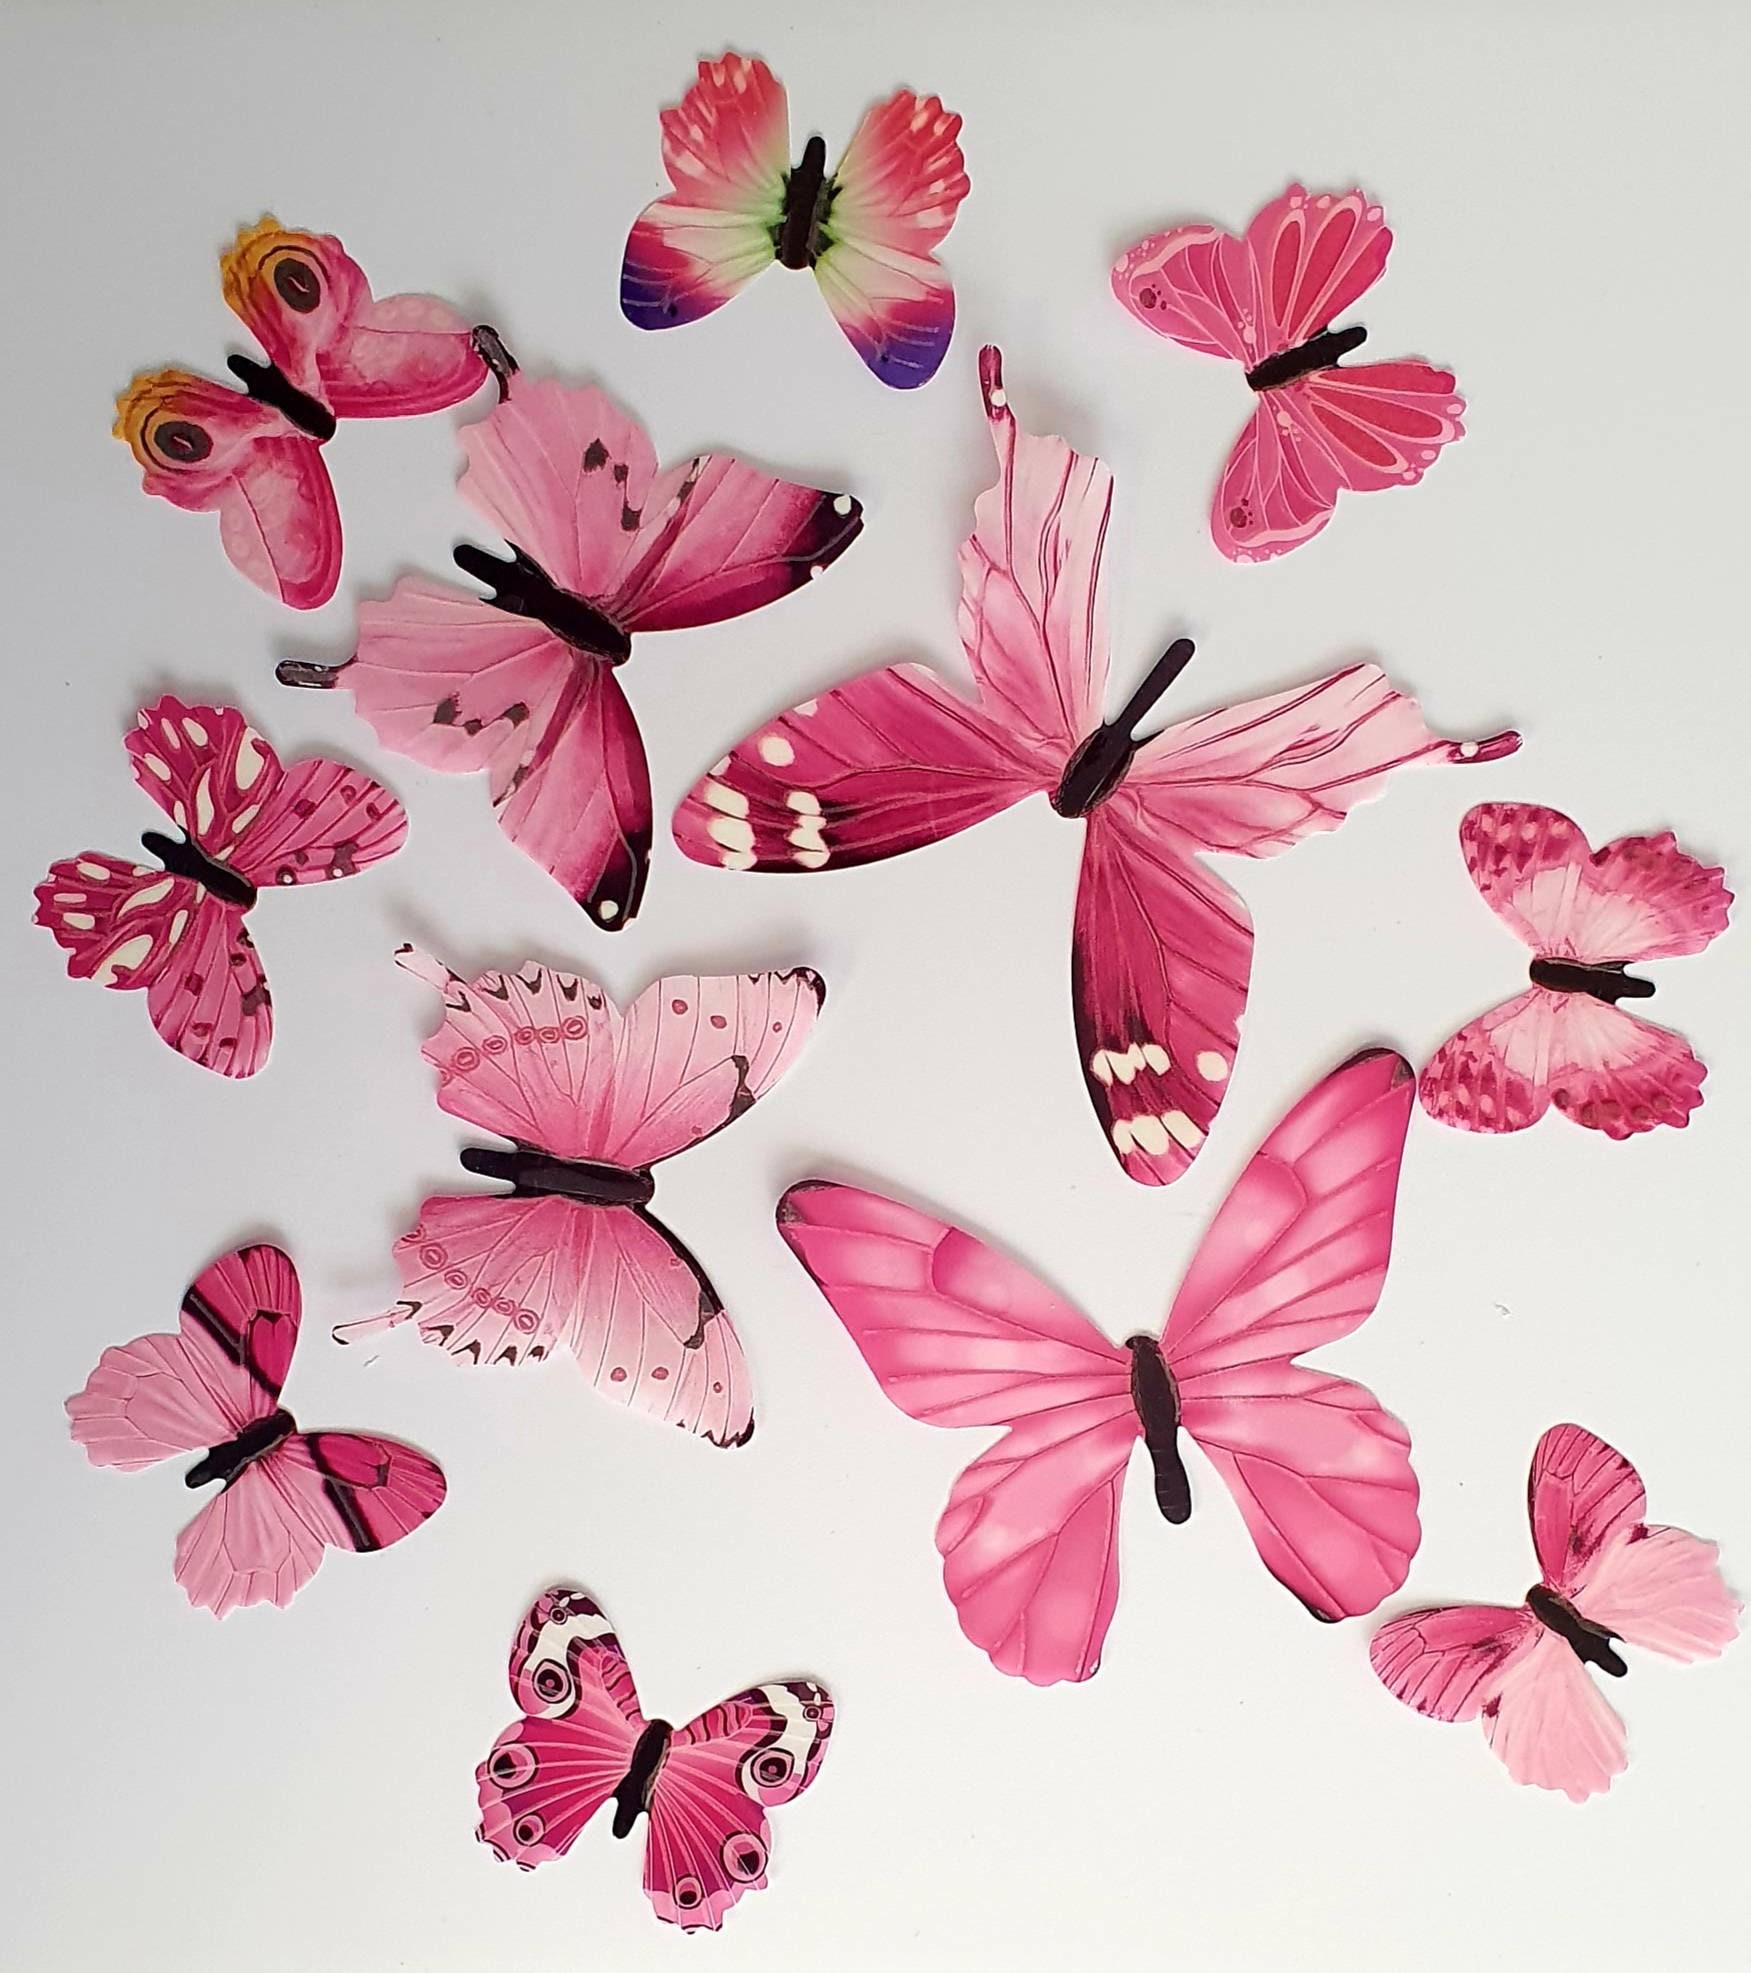 12pcs Single Layered Purple Paper Butterfly Decorations For Tabletops Or  Walls In Party